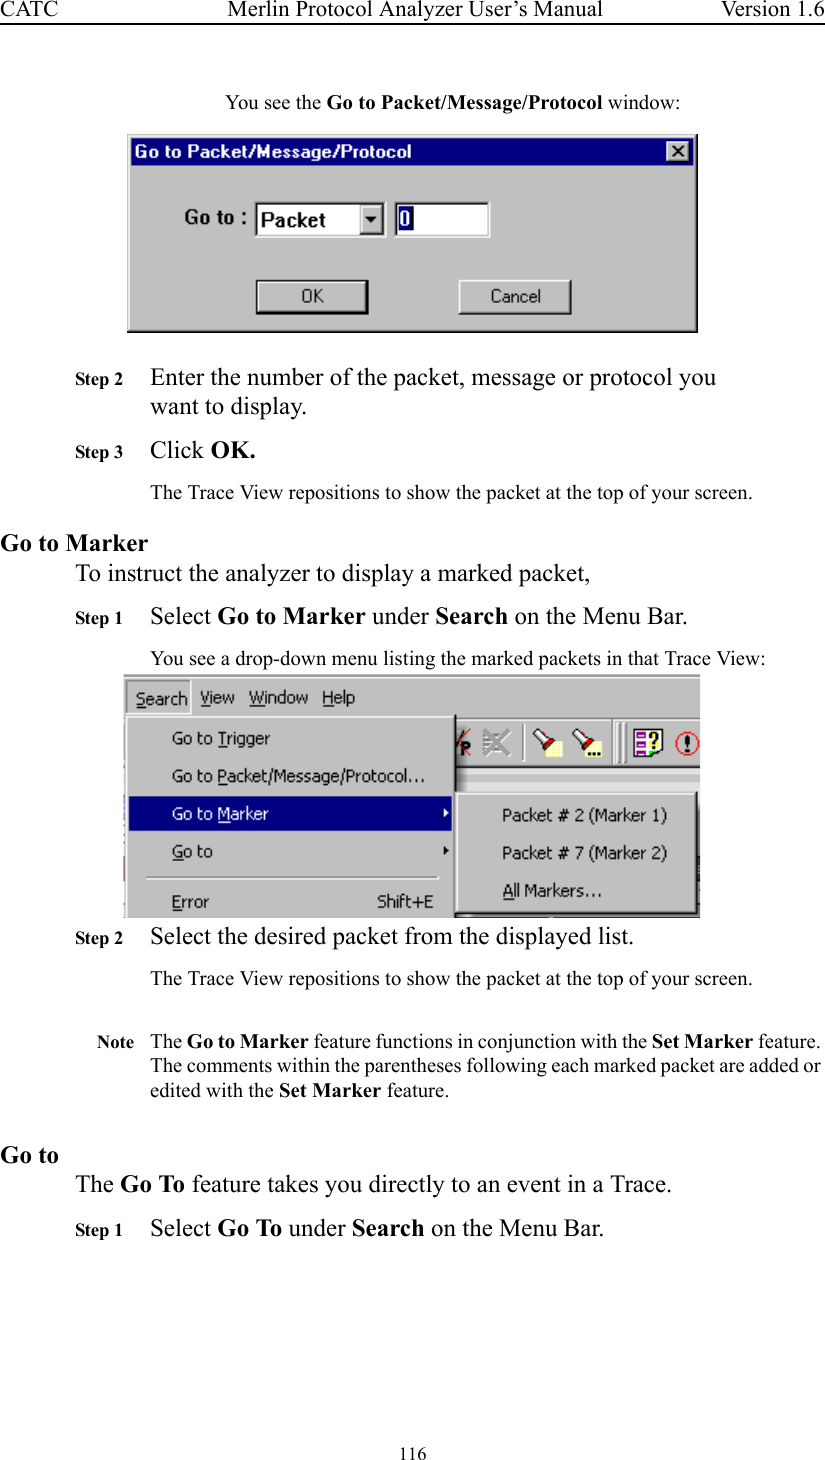 116 Merlin Protocol Analyzer User’s ManualCATC Version 1.6You see the Go to Packet/Message/Protocol window:Step 2 Enter the number of the packet, message or protocol you want to display.Step 3 Click OK.The Trace View repositions to show the packet at the top of your screen.Go to MarkerTo instruct the analyzer to display a marked packet,Step 1 Select Go to Marker under Search on the Menu Bar.You see a drop-down menu listing the marked packets in that Trace View:Step 2 Select the desired packet from the displayed list.The Trace View repositions to show the packet at the top of your screen.Note The Go to Marker feature functions in conjunction with the Set Marker feature. The comments within the parentheses following each marked packet are added or edited with the Set Marker feature. Go toThe Go To feature takes you directly to an event in a Trace.Step 1 Select Go To under Search on the Menu Bar.